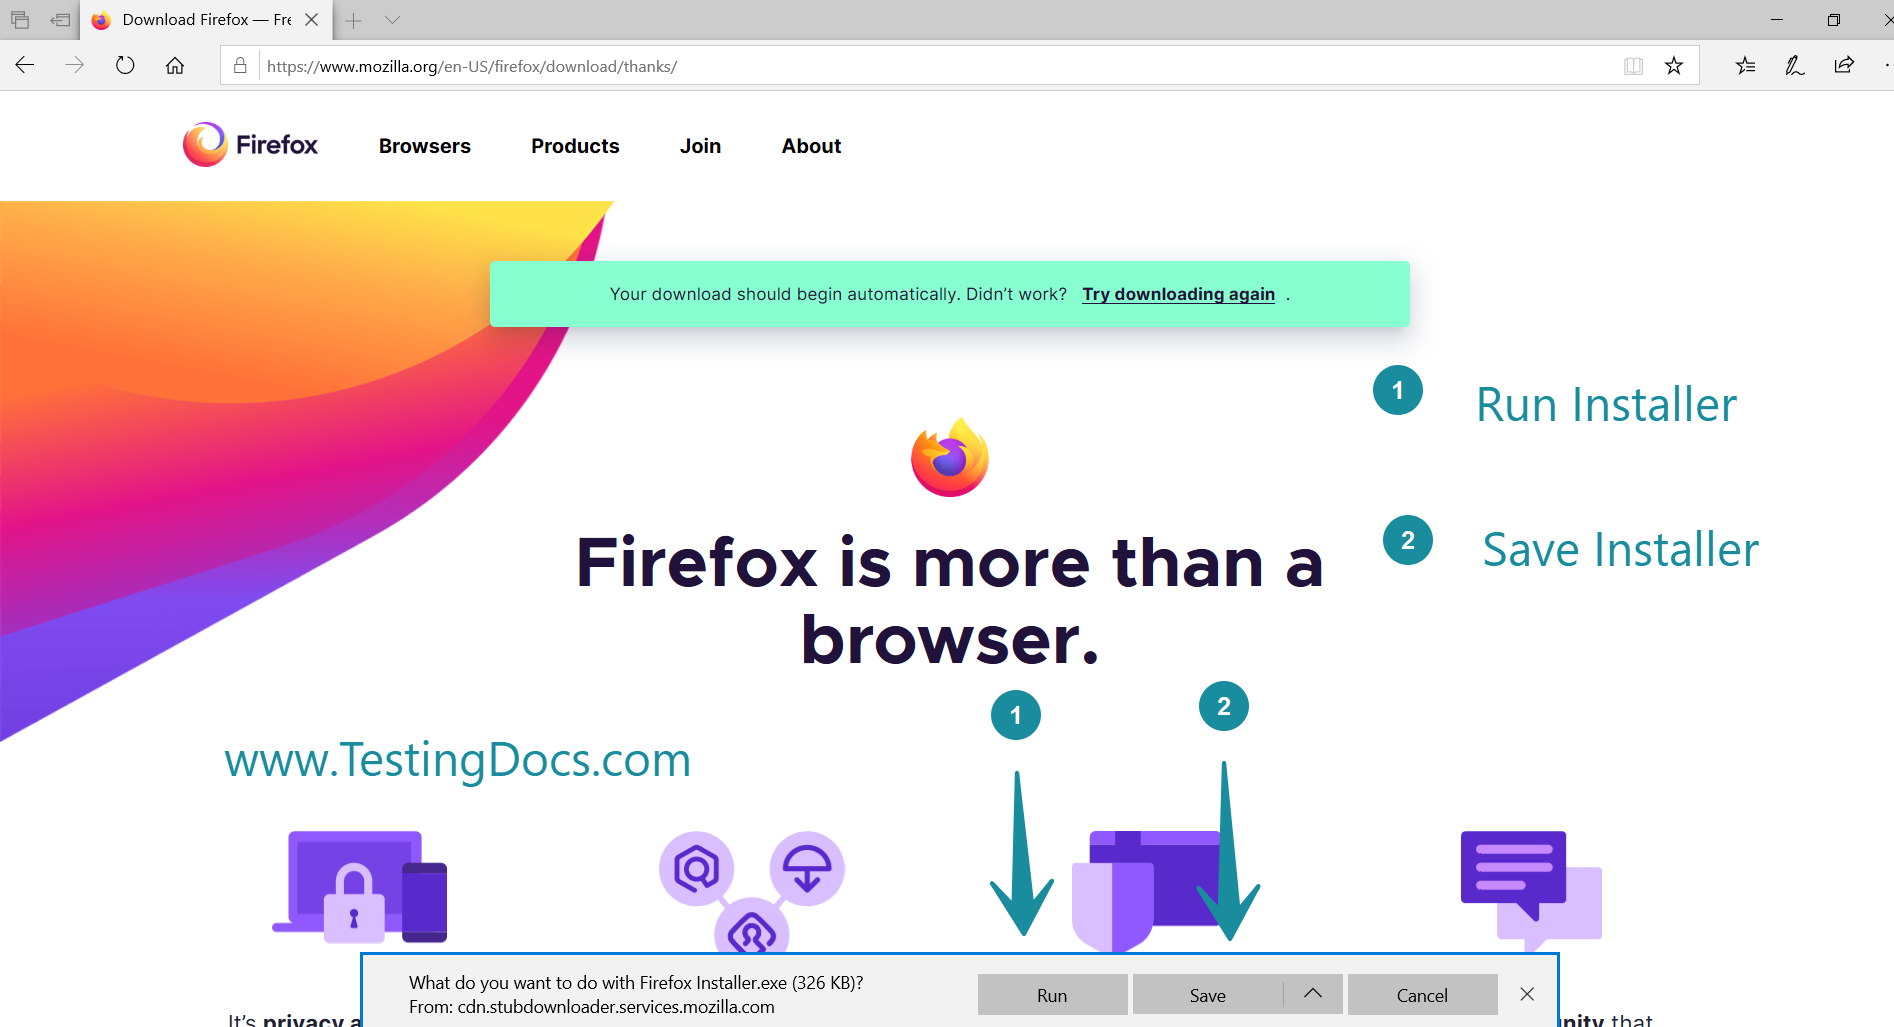 Save the Firefox Installer